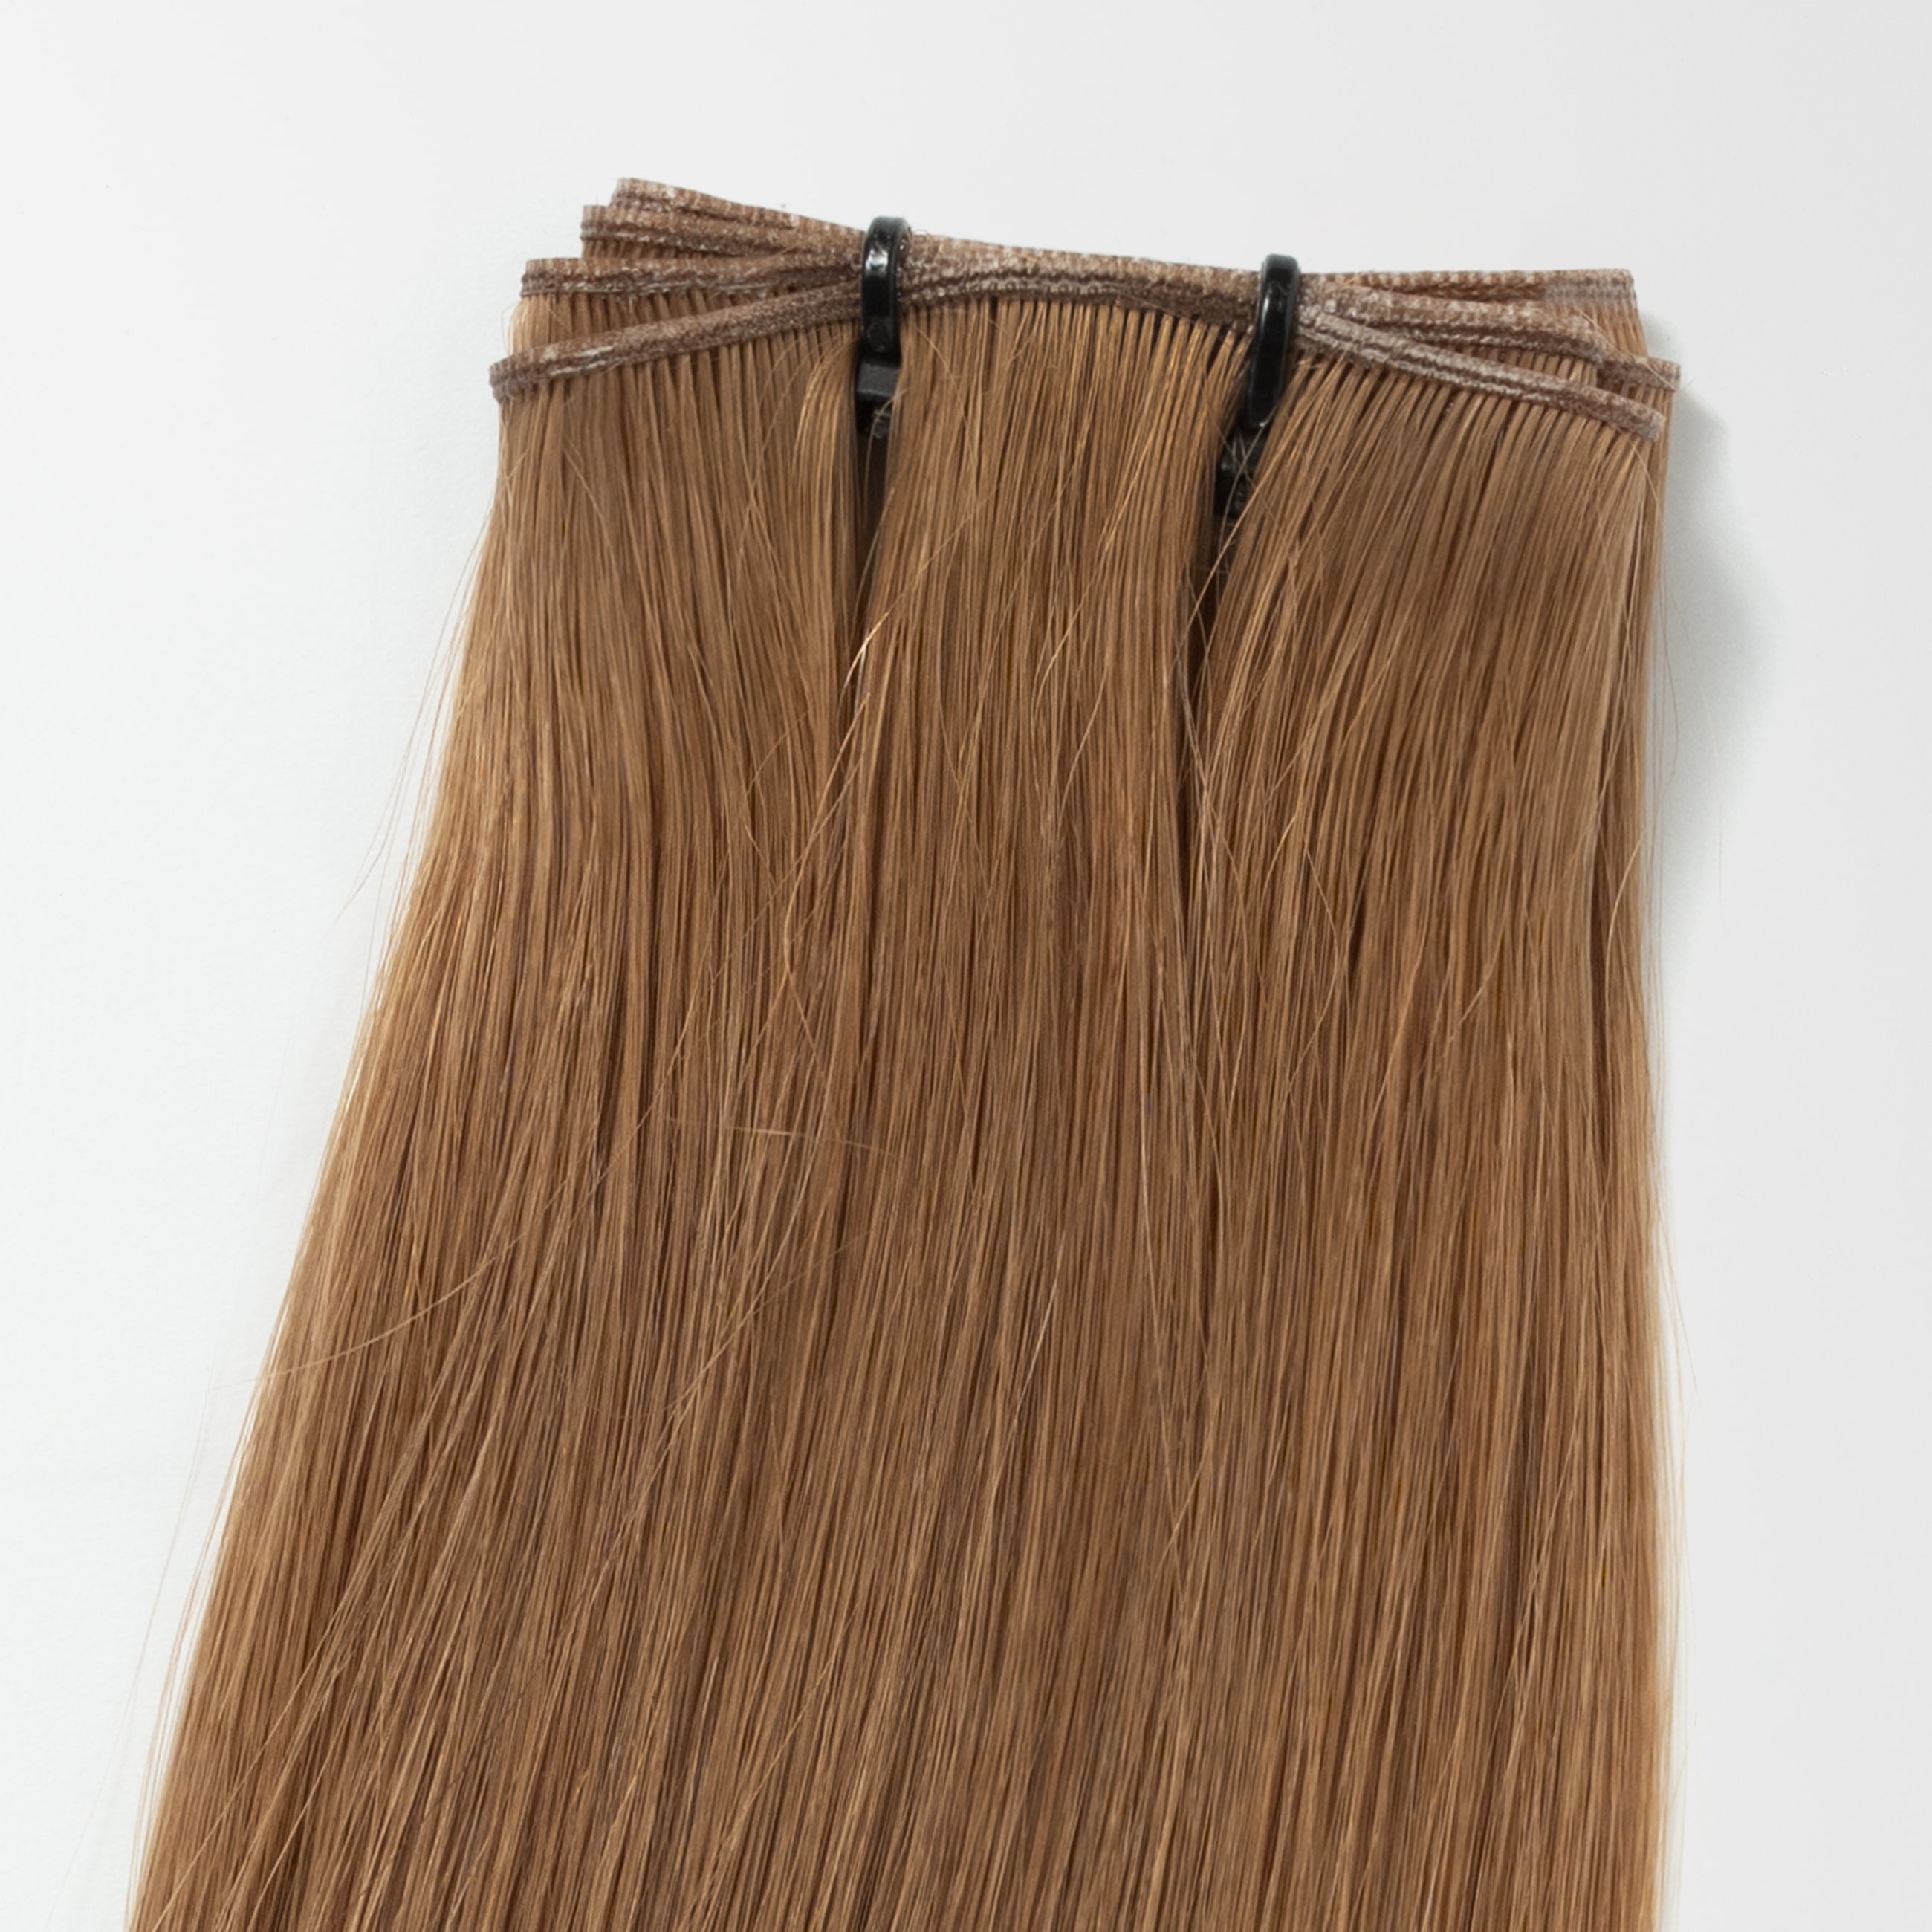 Invisible weft - Light Natural Brown 5